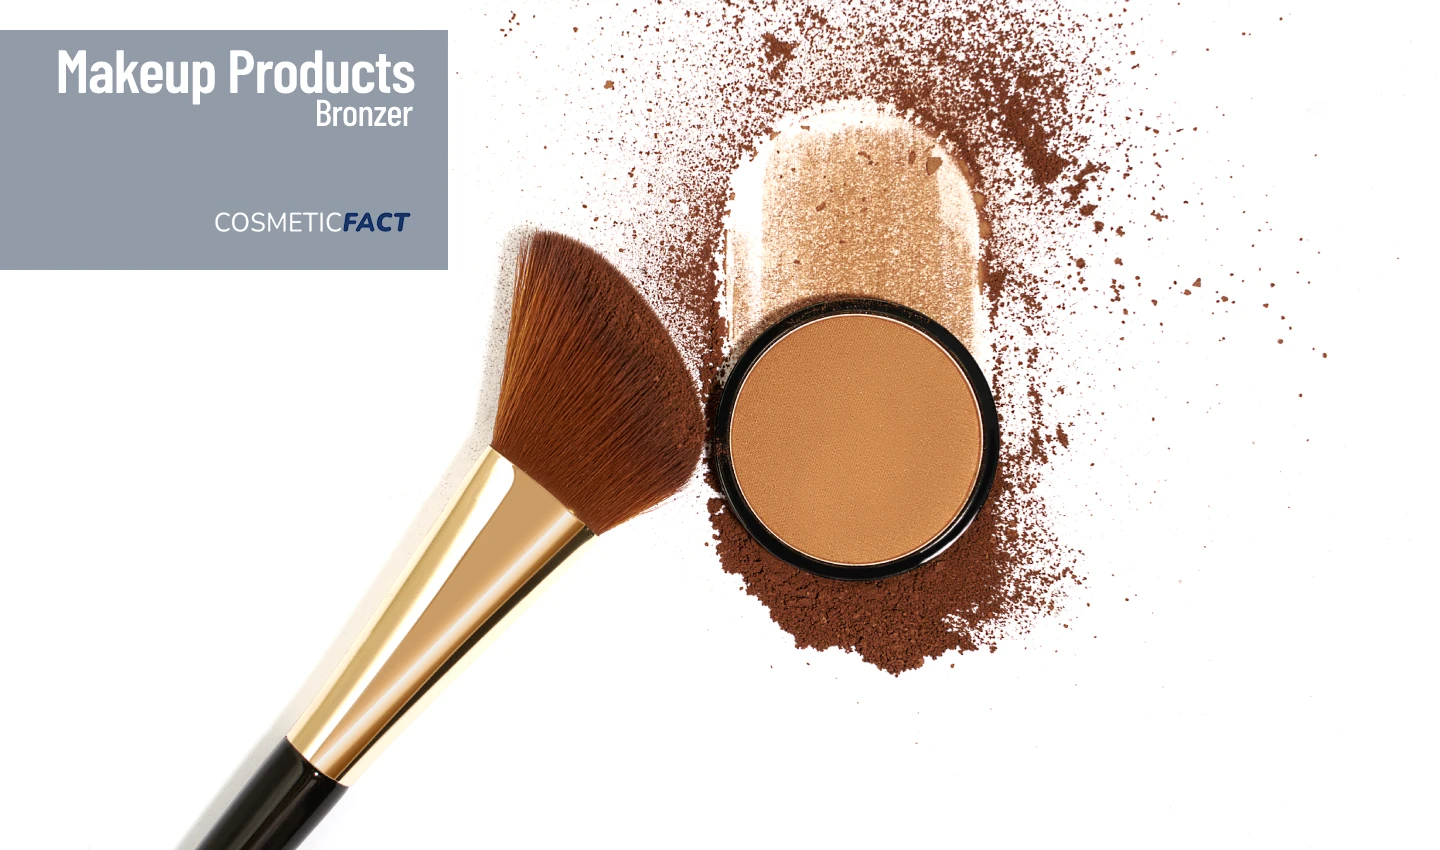 "Image of a bronze blush and brush, representing the importance of choosing the right bronzer for your skin tone."